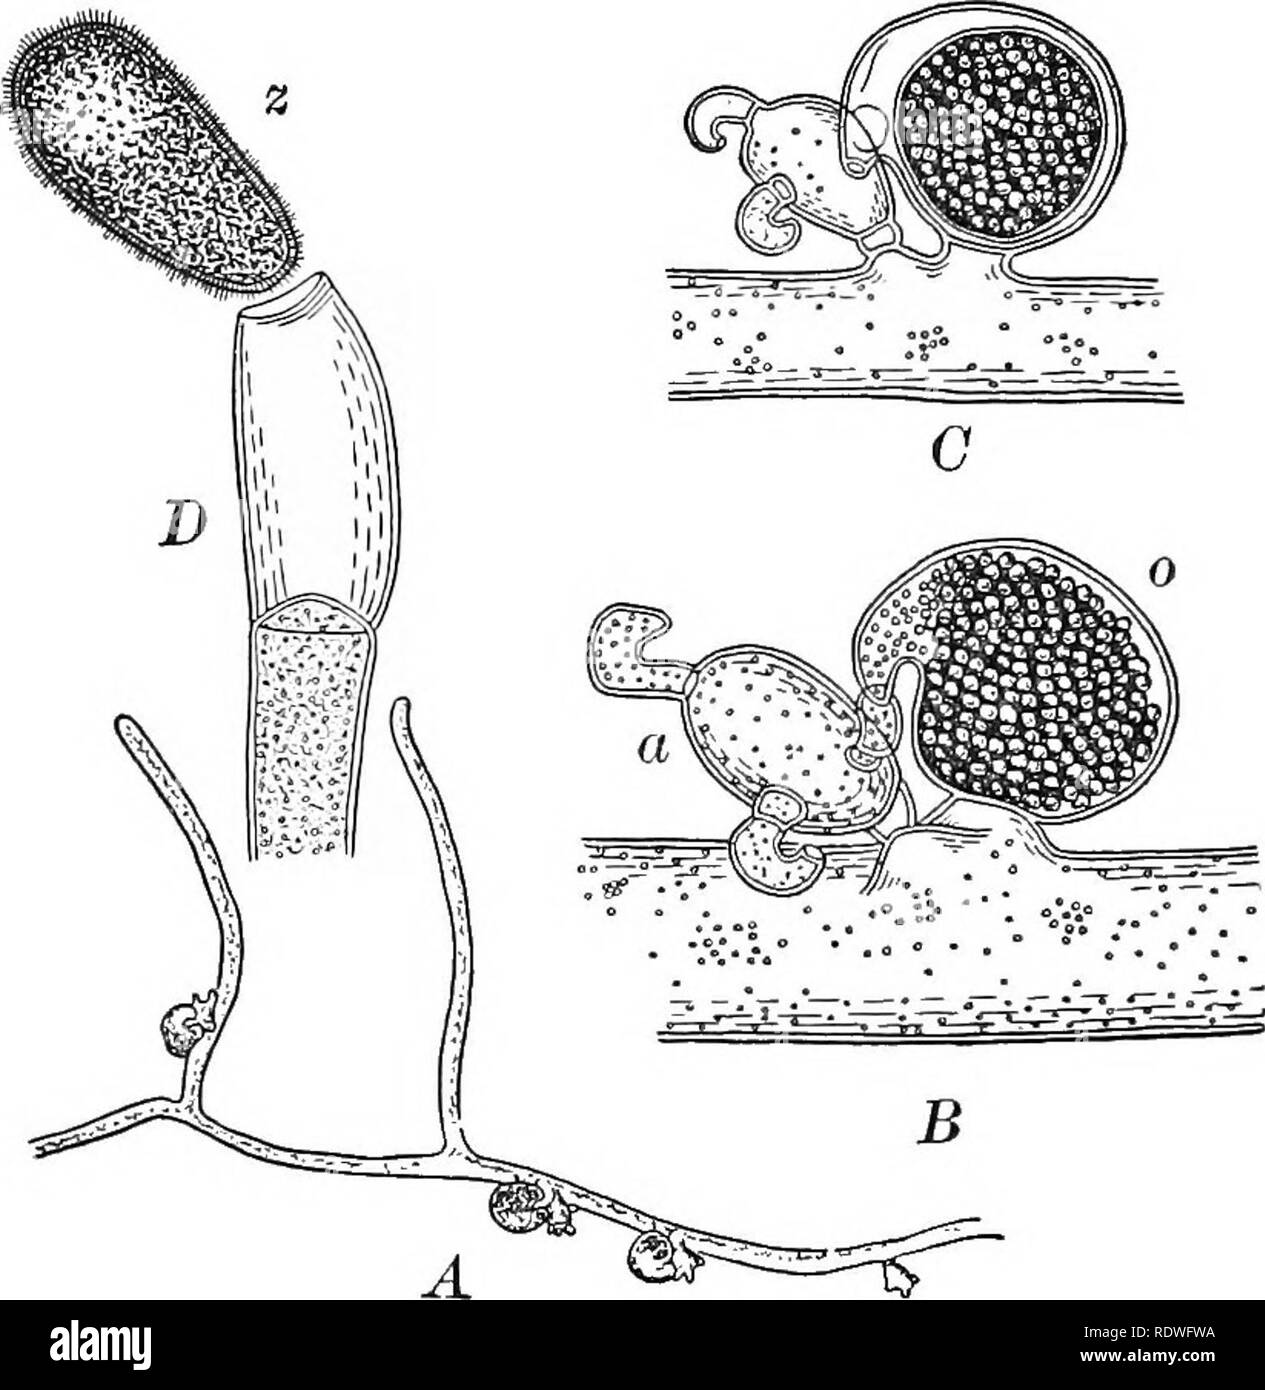 . Essentials of botany. Botany; Botany. 226 ESSENTIALS OF BOTANY felt-like masses which it forms. It must not be confused with moss protonema (Fig. 199) which also grows on damp earth. The protonema has many cross-partitions in the filaments (often oblique in position) and lacks other. Fig. 157. Vaucheria synandra. A, a filament with archegonia and antheridia (considerably magni- fied); iJ, part of same much more highly magnified; o, oogonium; a, antheridium; C, a later stage of B; D, end of a filament with a zoospore, z, escaping (liighly magnified). characteristics shown in Fig. 157, A. It w Stock Photo